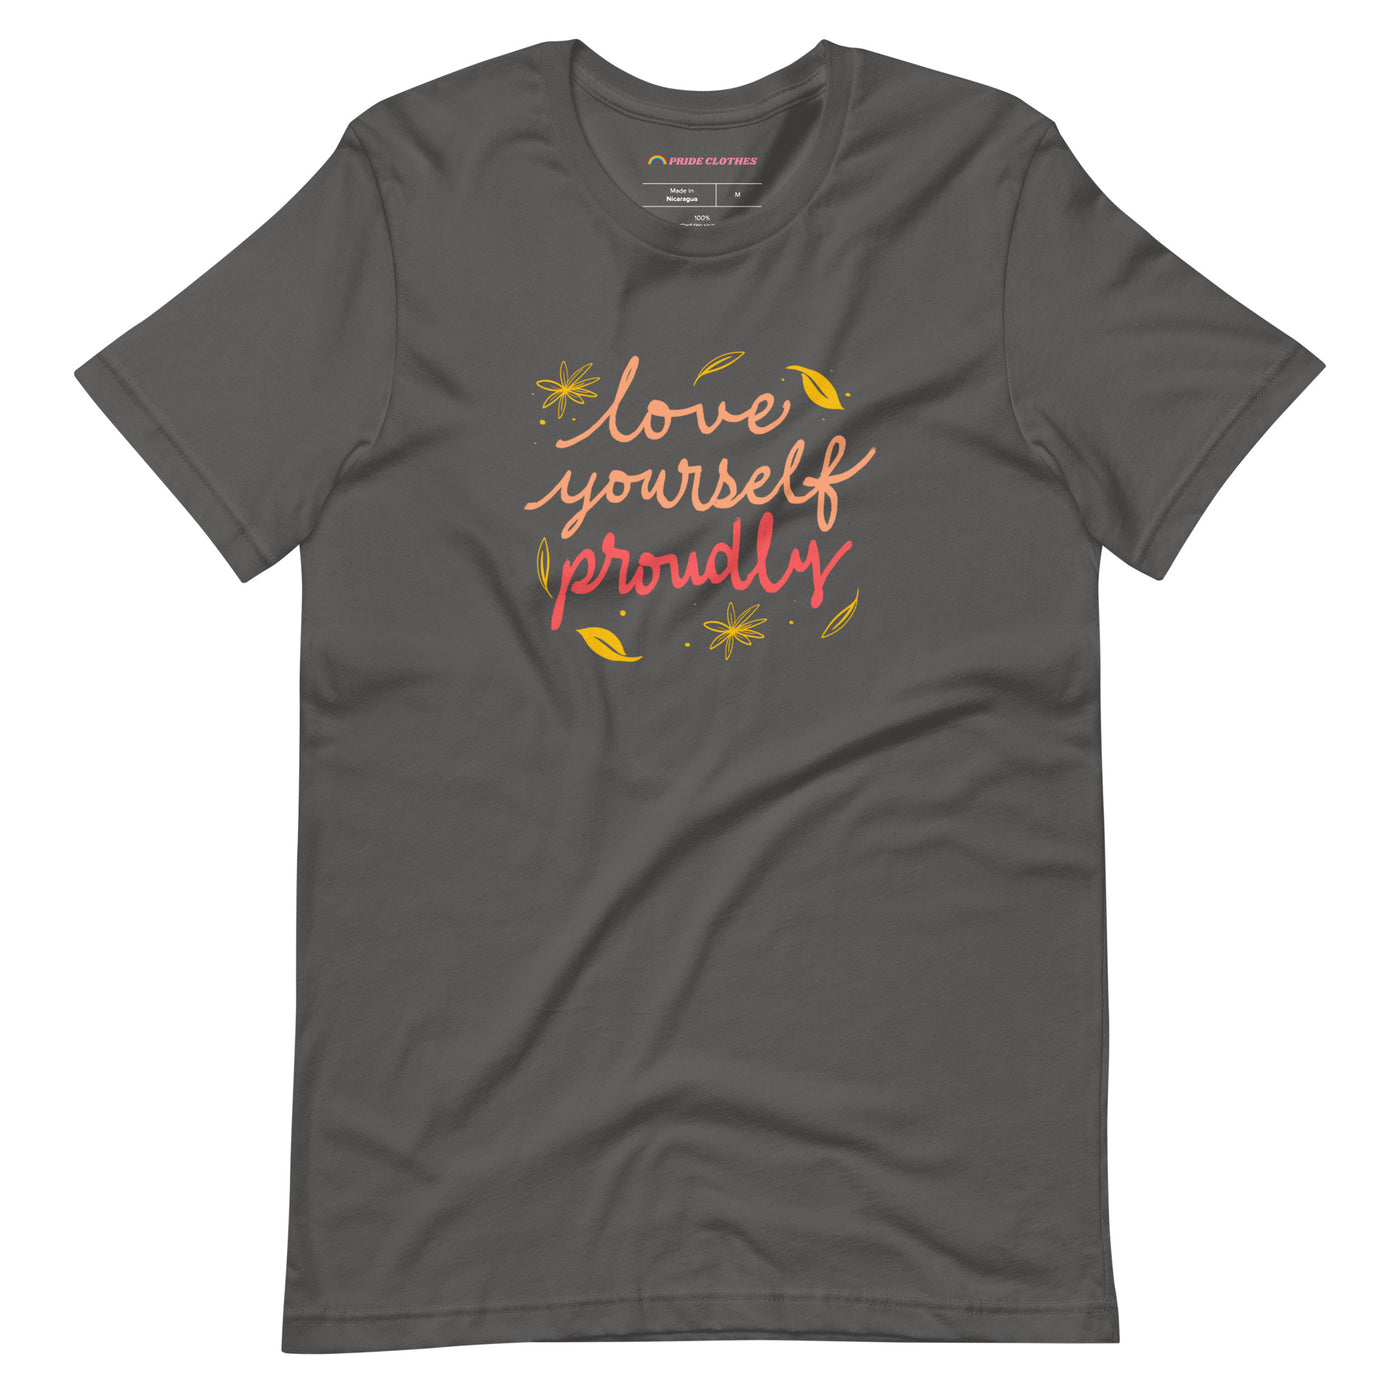 Pride Clothes - Pride Starts with Self-Love Yourself Proudly T-Shirt - Asphalt